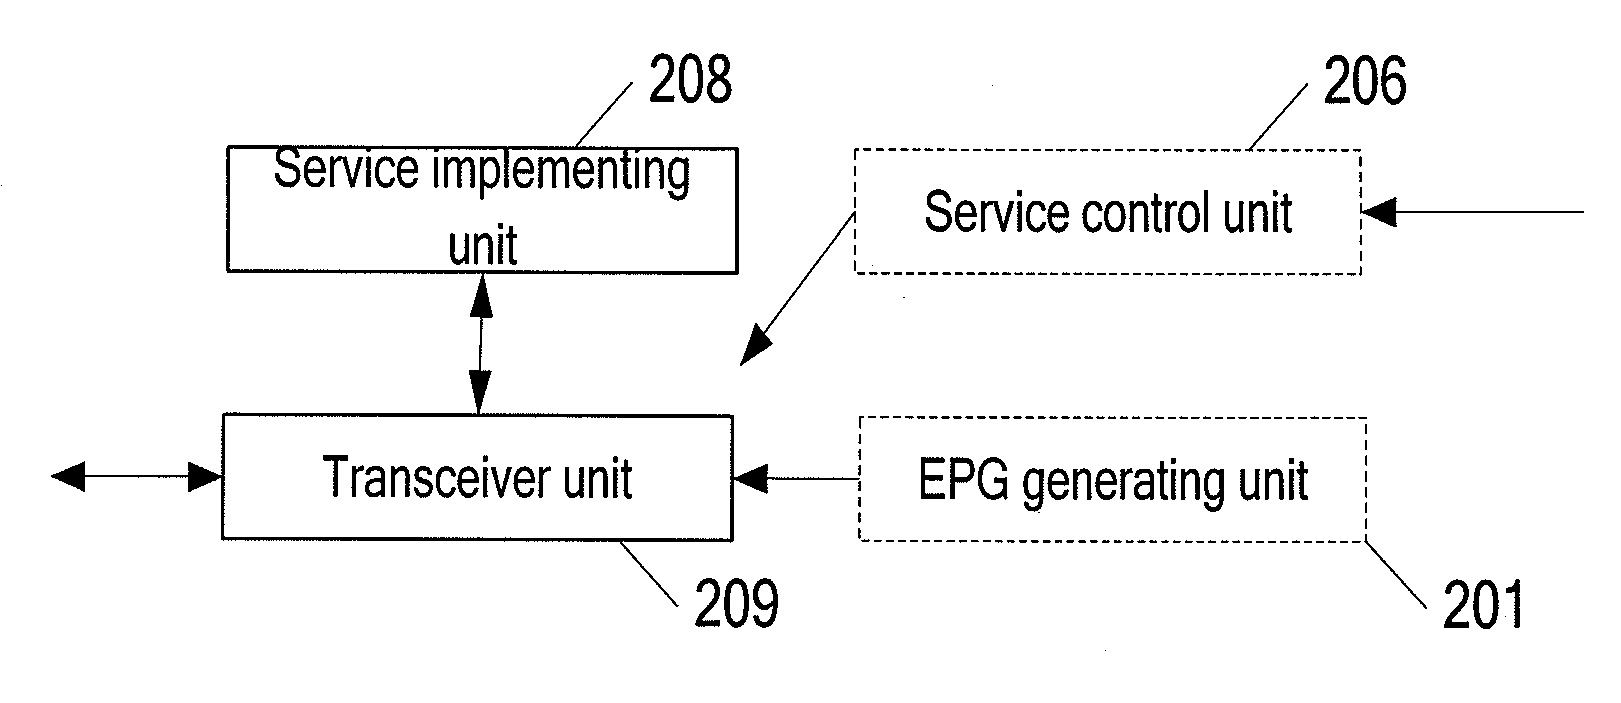 Method and system for discovering streaming services, and service discovery apparatus